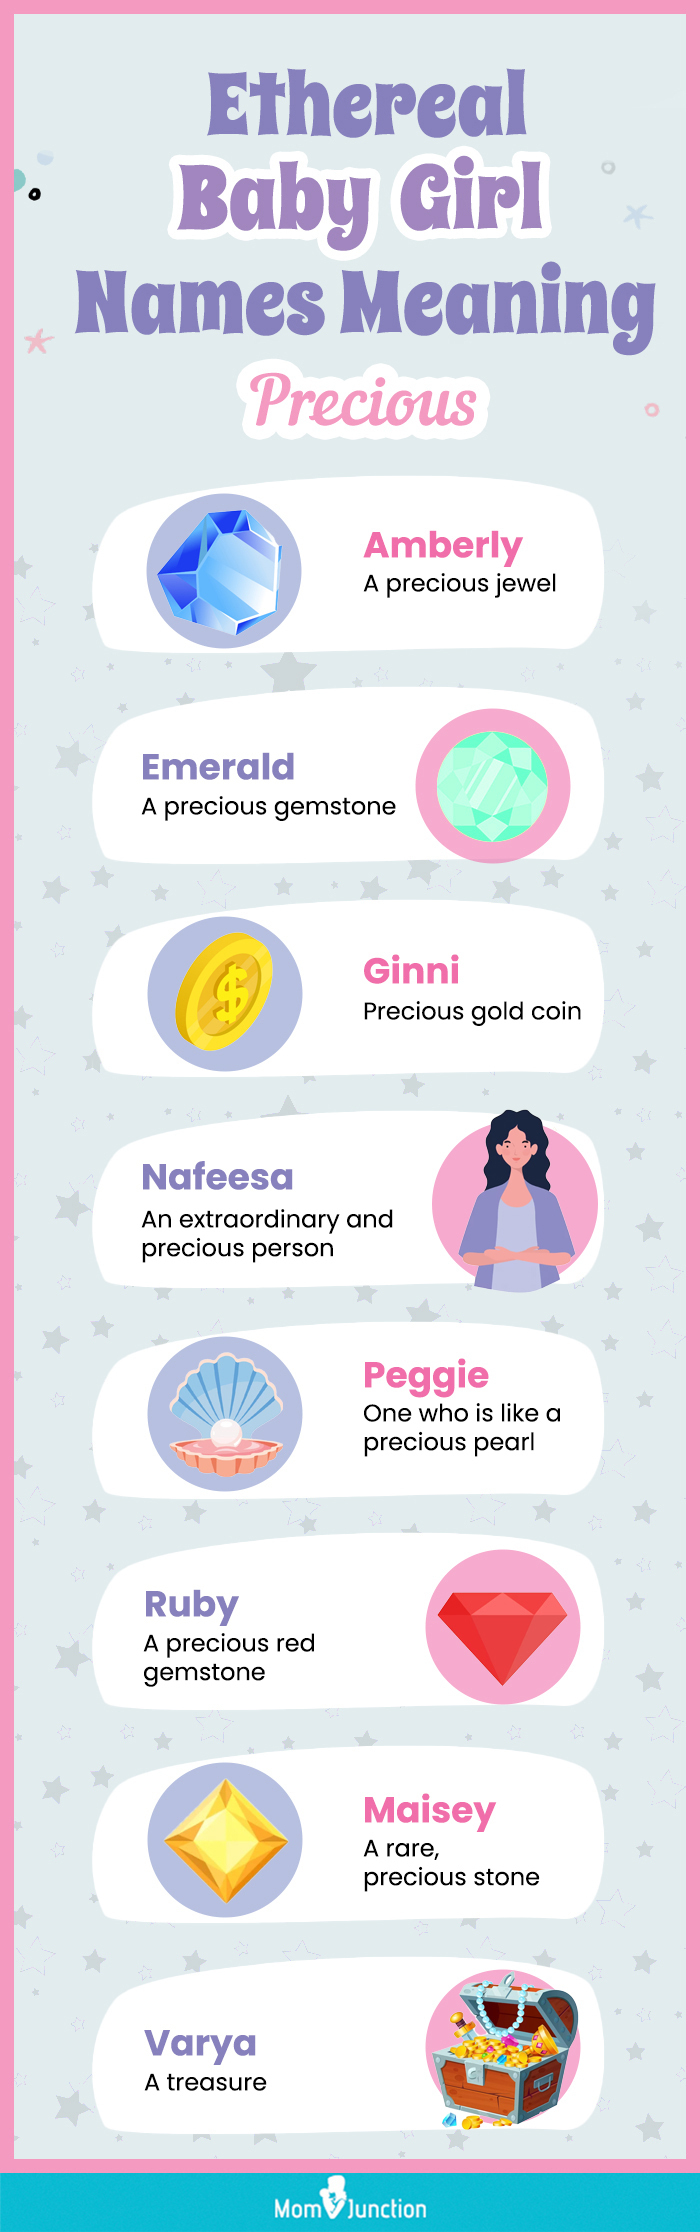 Ethereal Baby Girl Names Meaning Precious